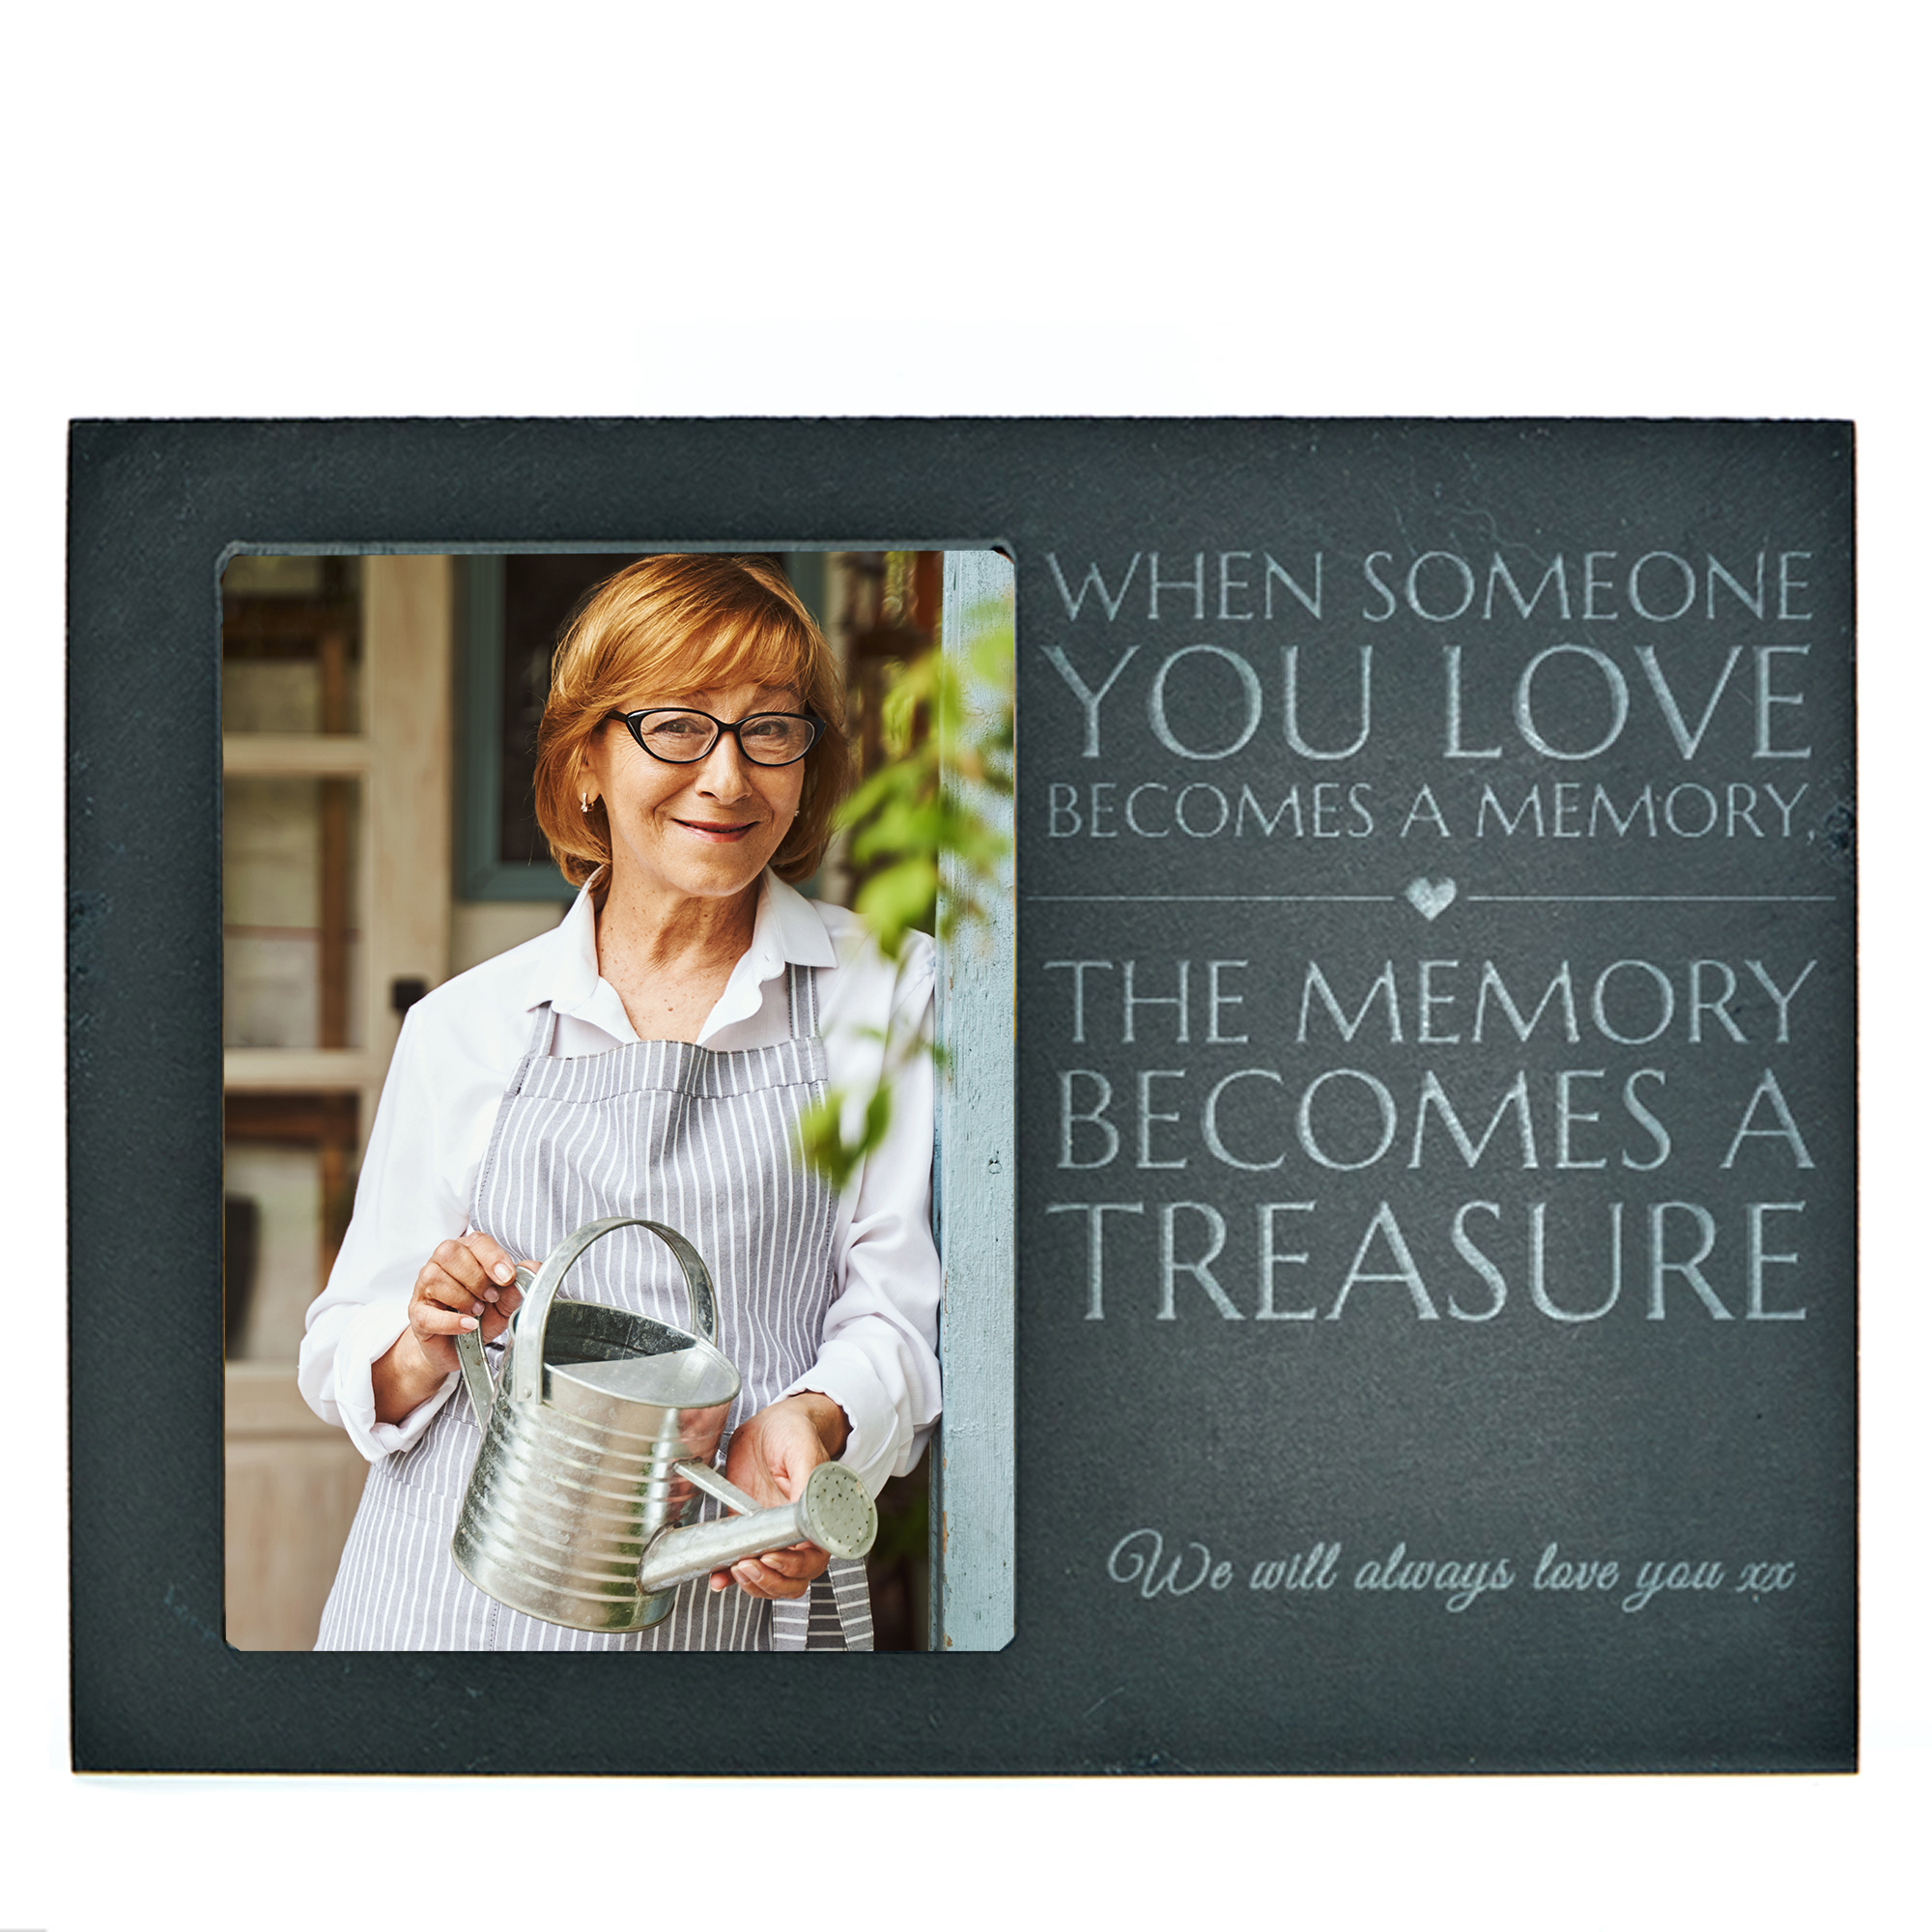 Personalised Engraved Slate Chalkboard Photo Frame - When Someone You Love